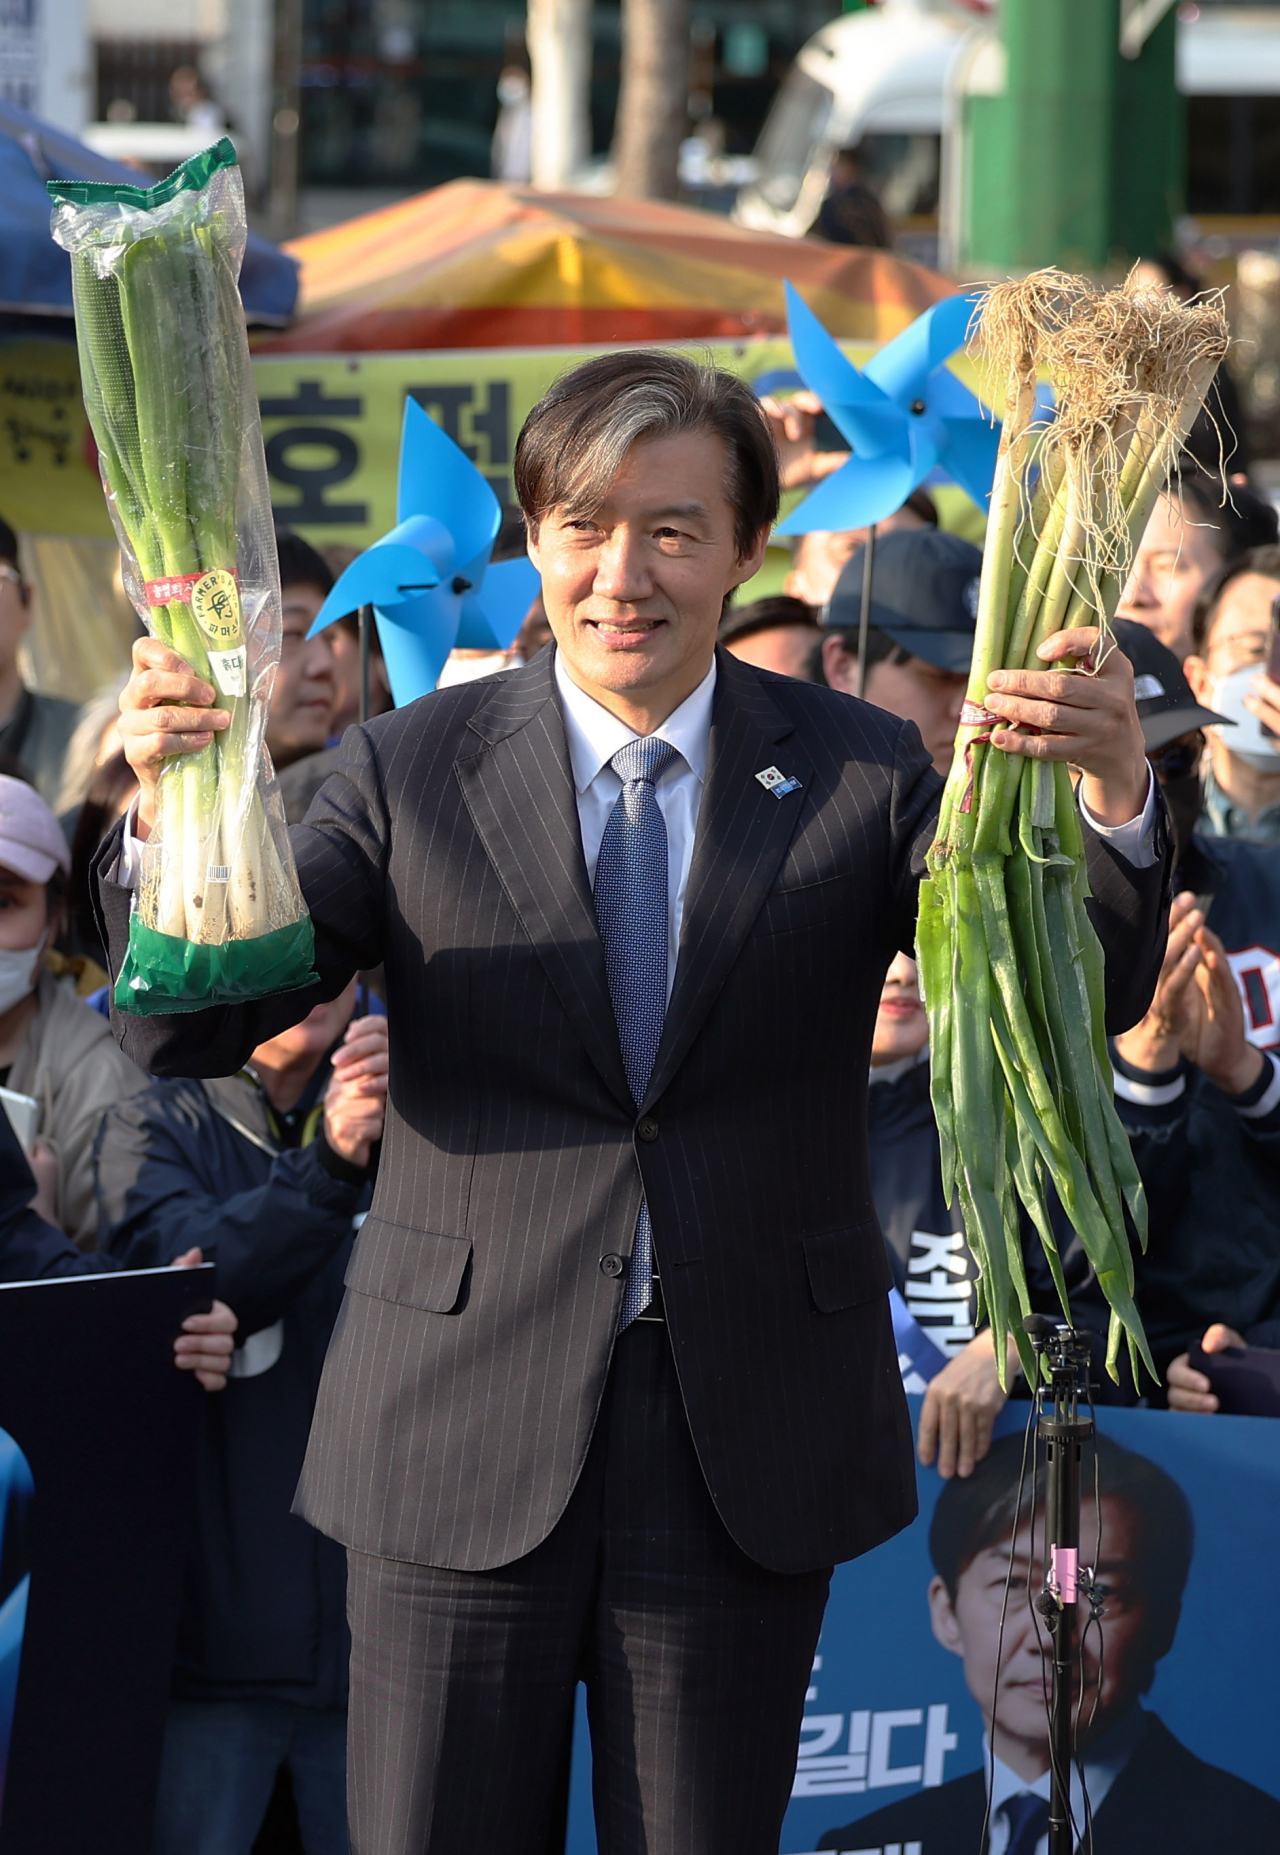 Cho Kuk, leader of the Rebuilding Korea Party, holds bundles of scallions during his visit to Seongnam, Gyeonggi Province, April 1. (Yonhap)